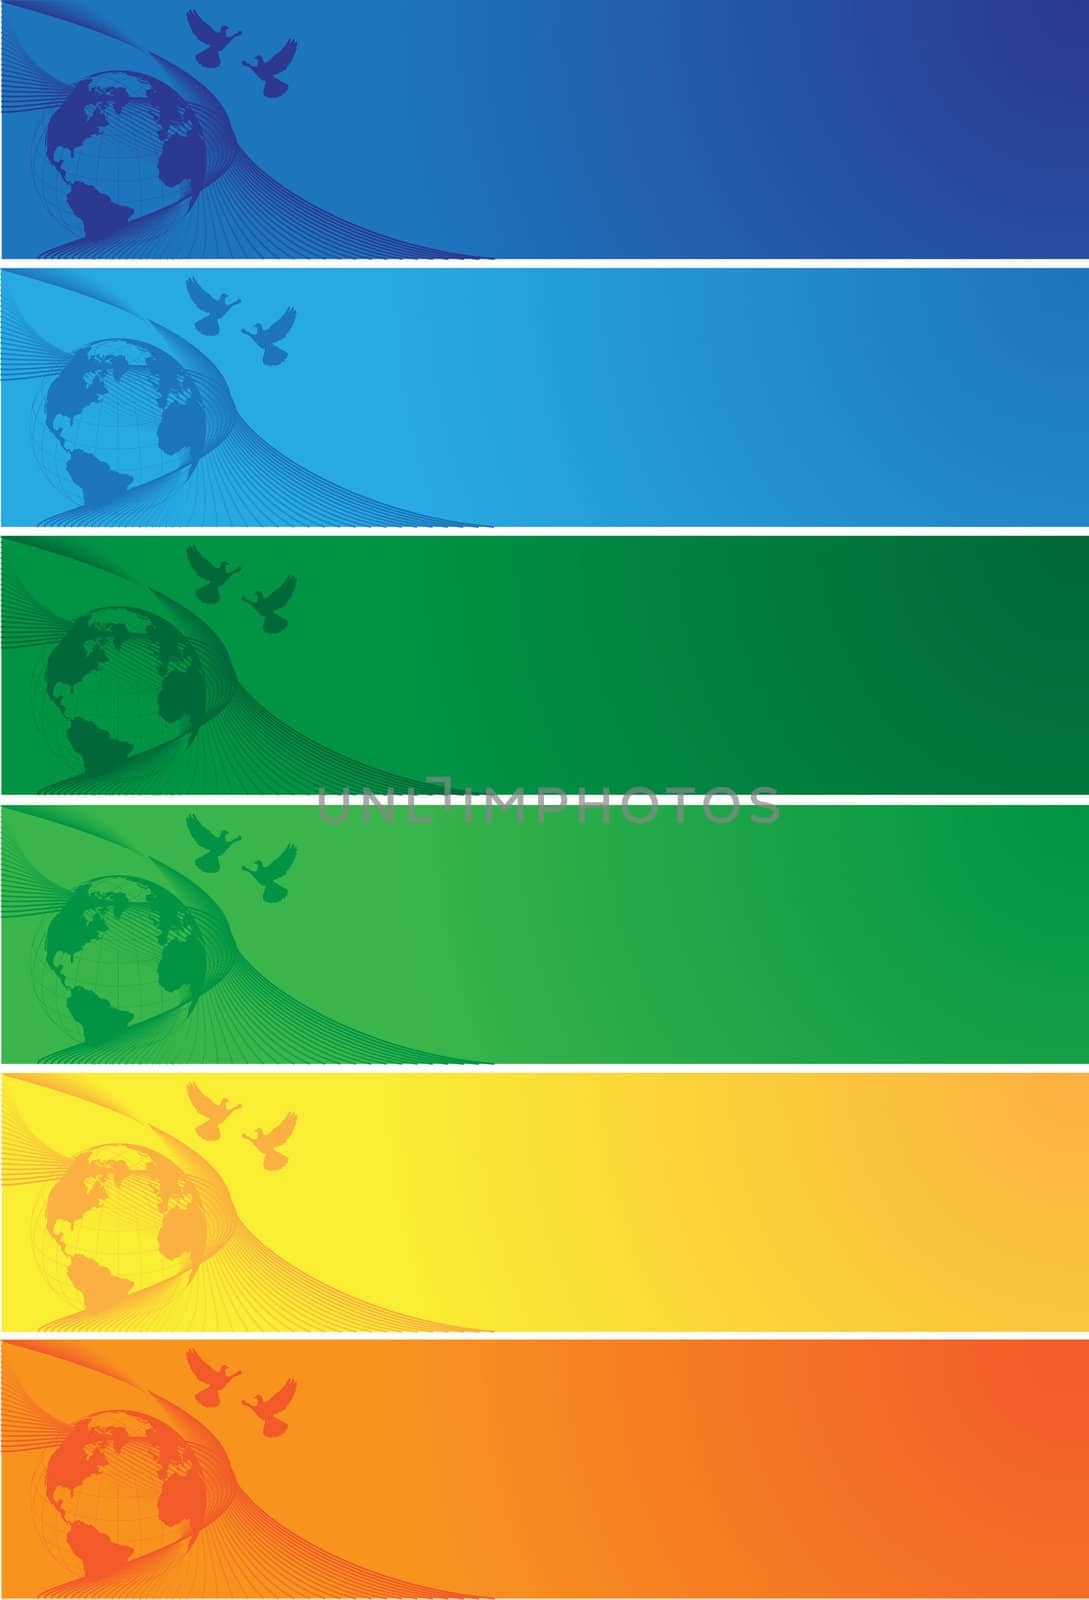 set of colored banners with globes and birds